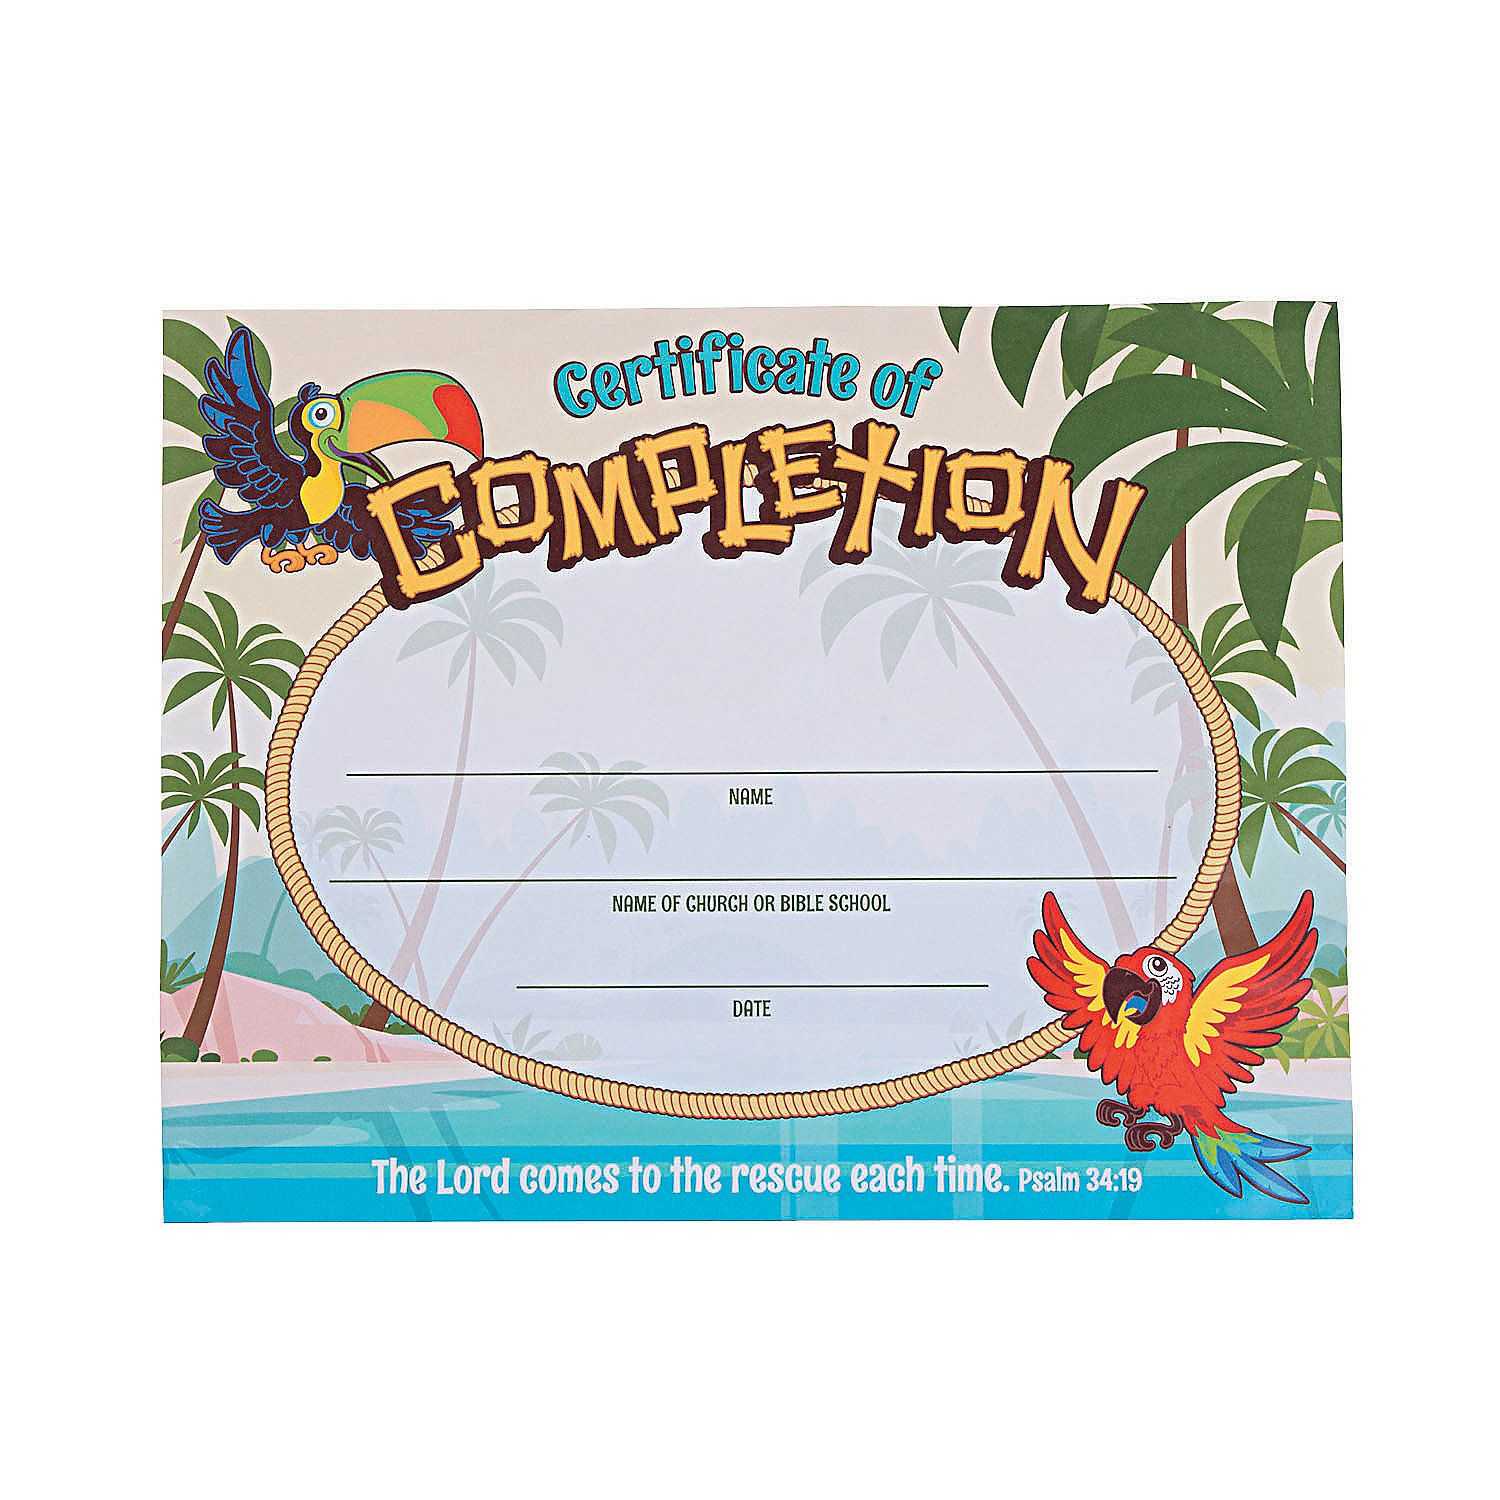 Island Vbs Certificates Of Completion | Stuff I Designed For With Regard To Vbs Certificate Template